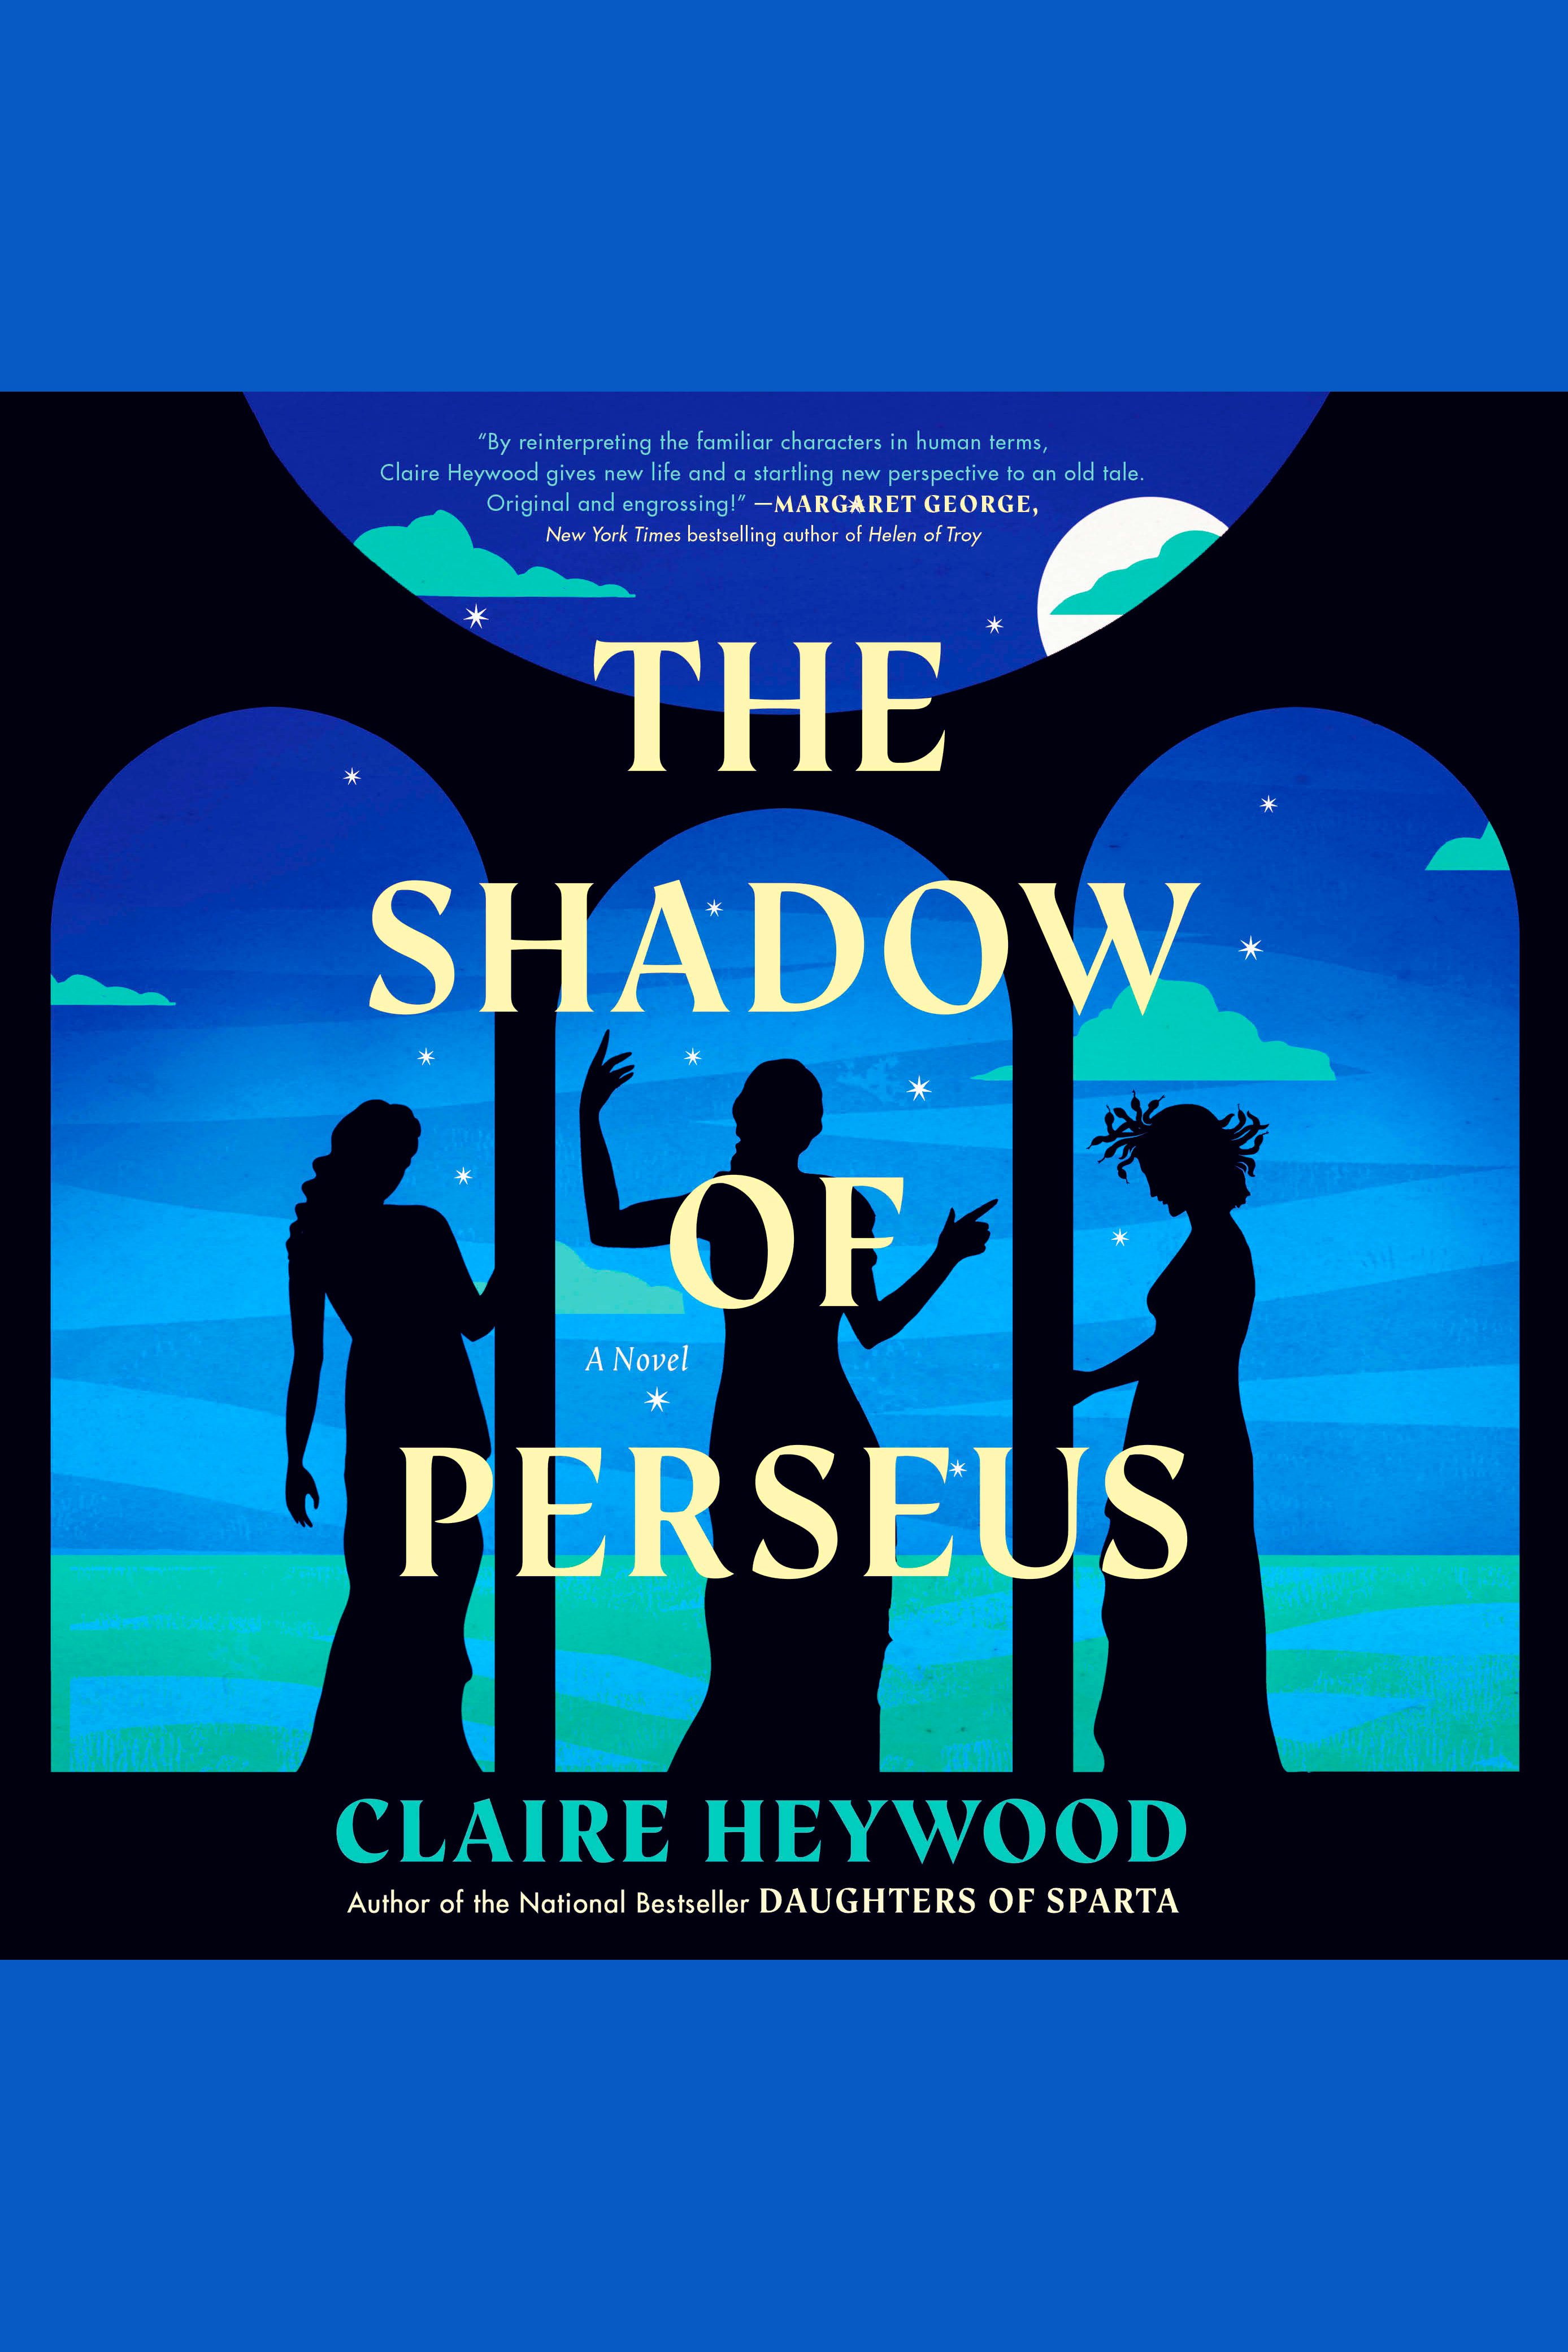 The Shadow of Perseus cover image